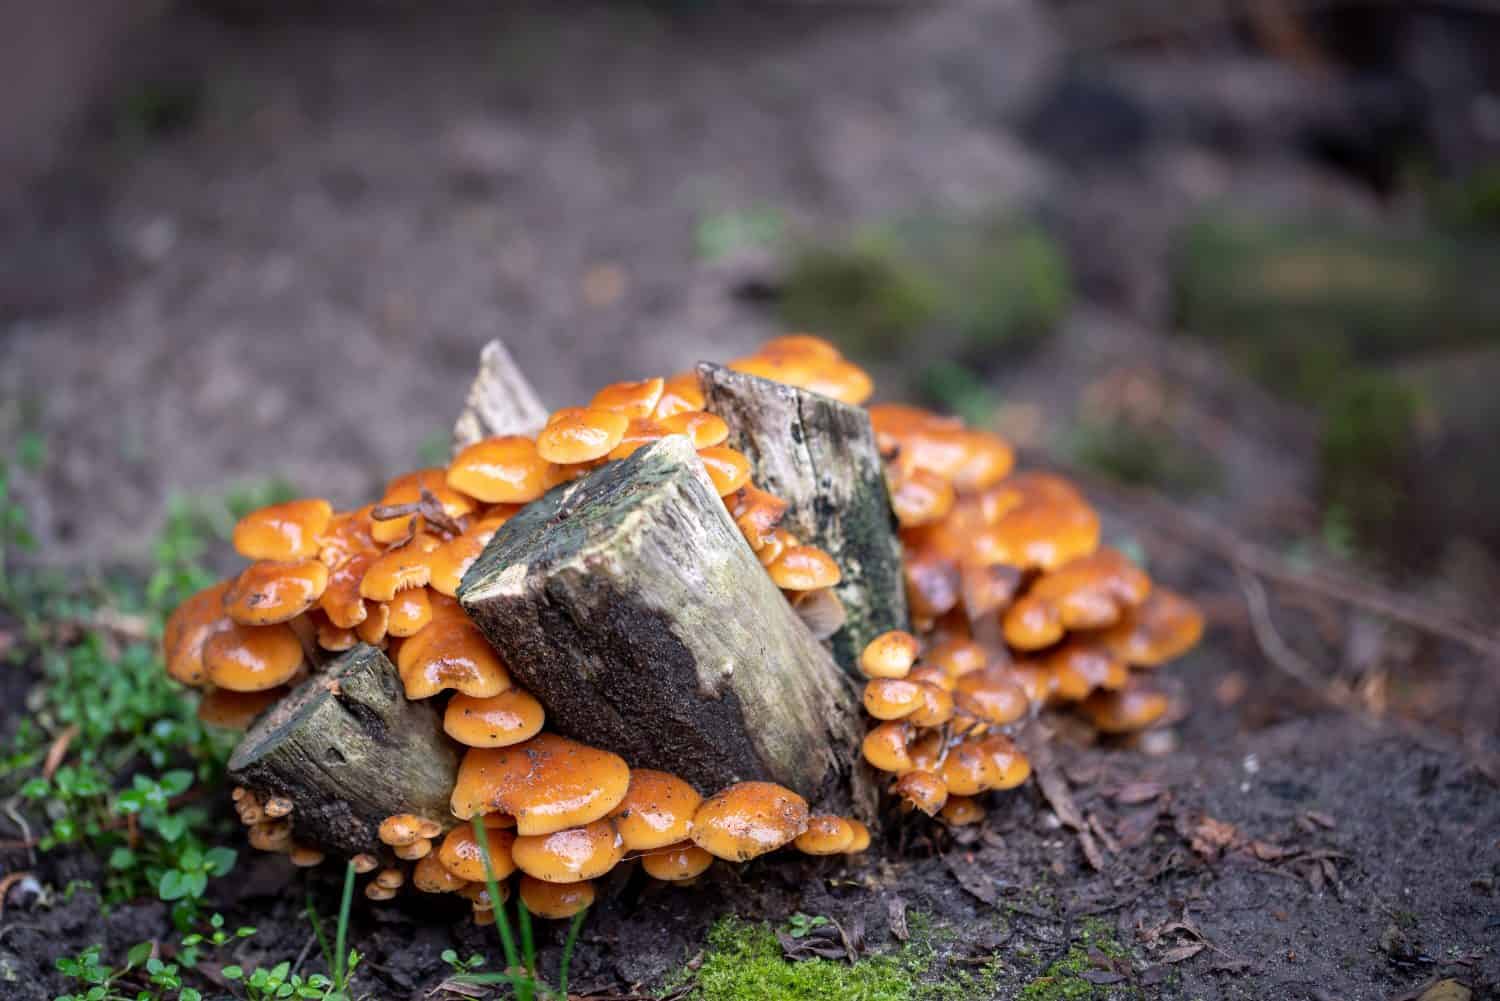 Pholiota microspora, commonly known as Pholiota nameko or simply nameko is a small, amber-brown mushroom with a slightly gelatinous coating that is used as an ingredient in miso soup and nabemono.